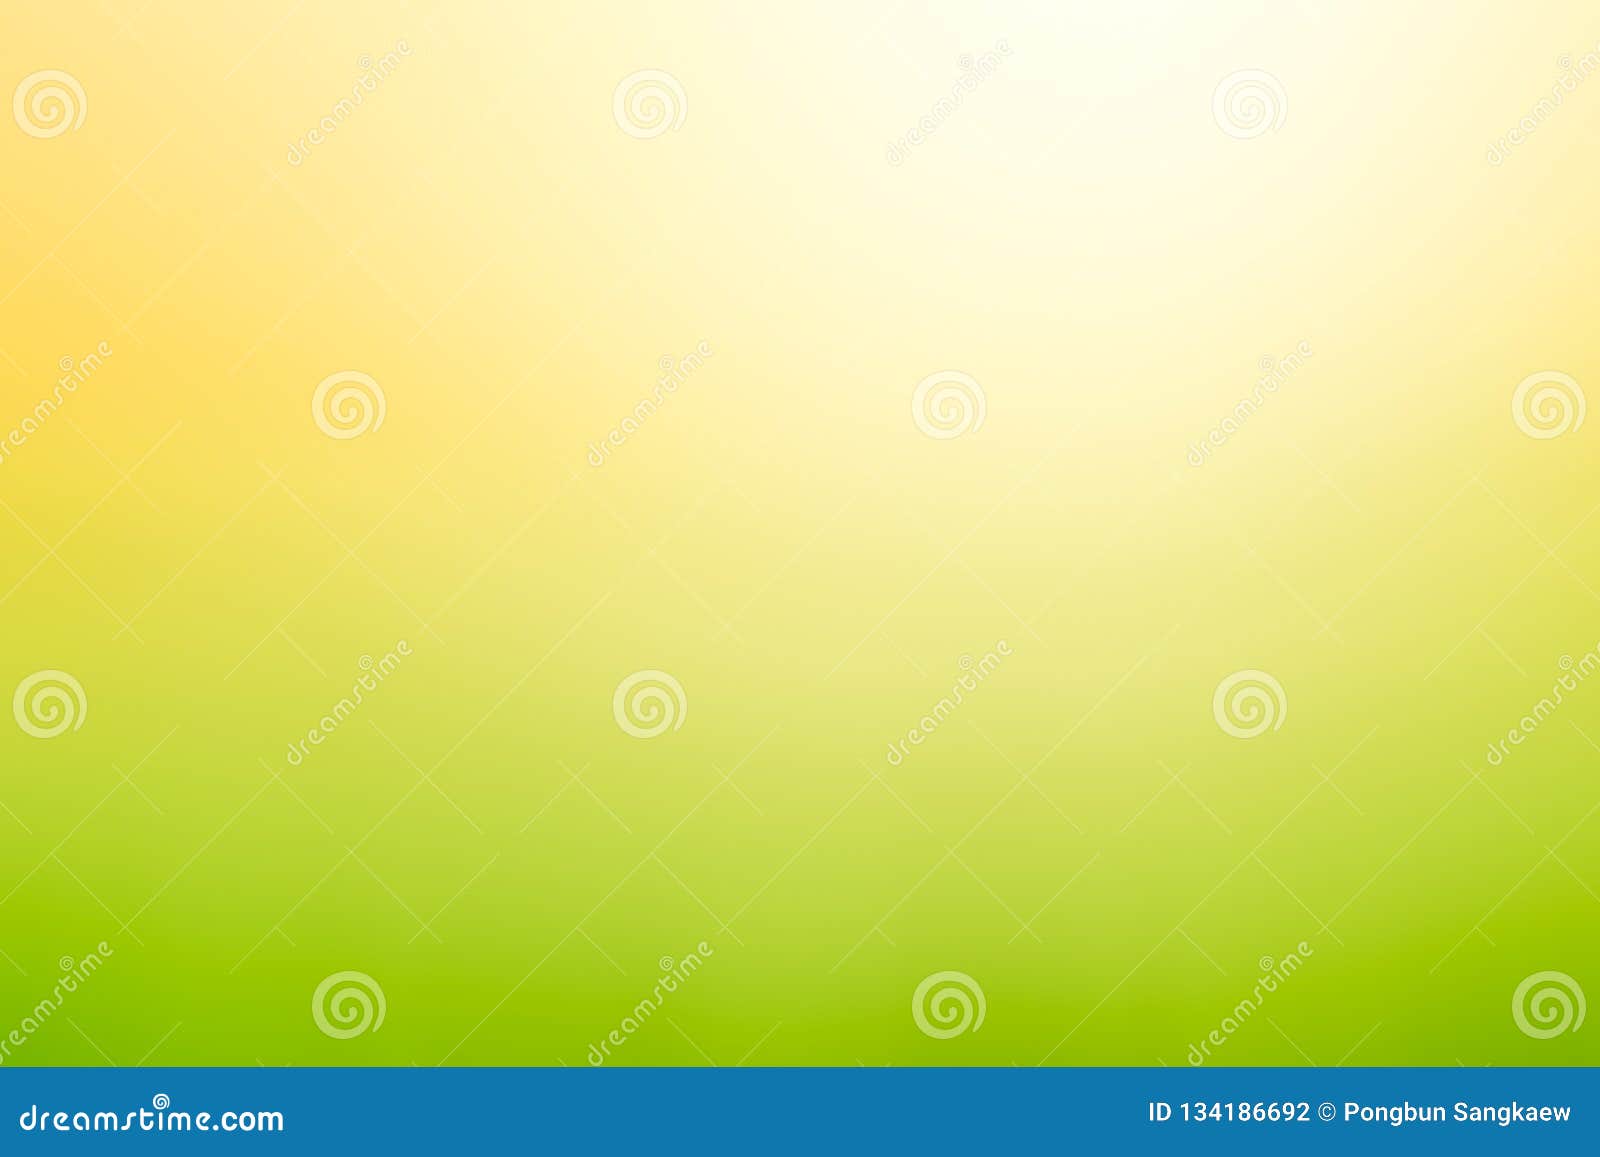 Gradient Soft Color Yellow and Green Light Abstract Background ...